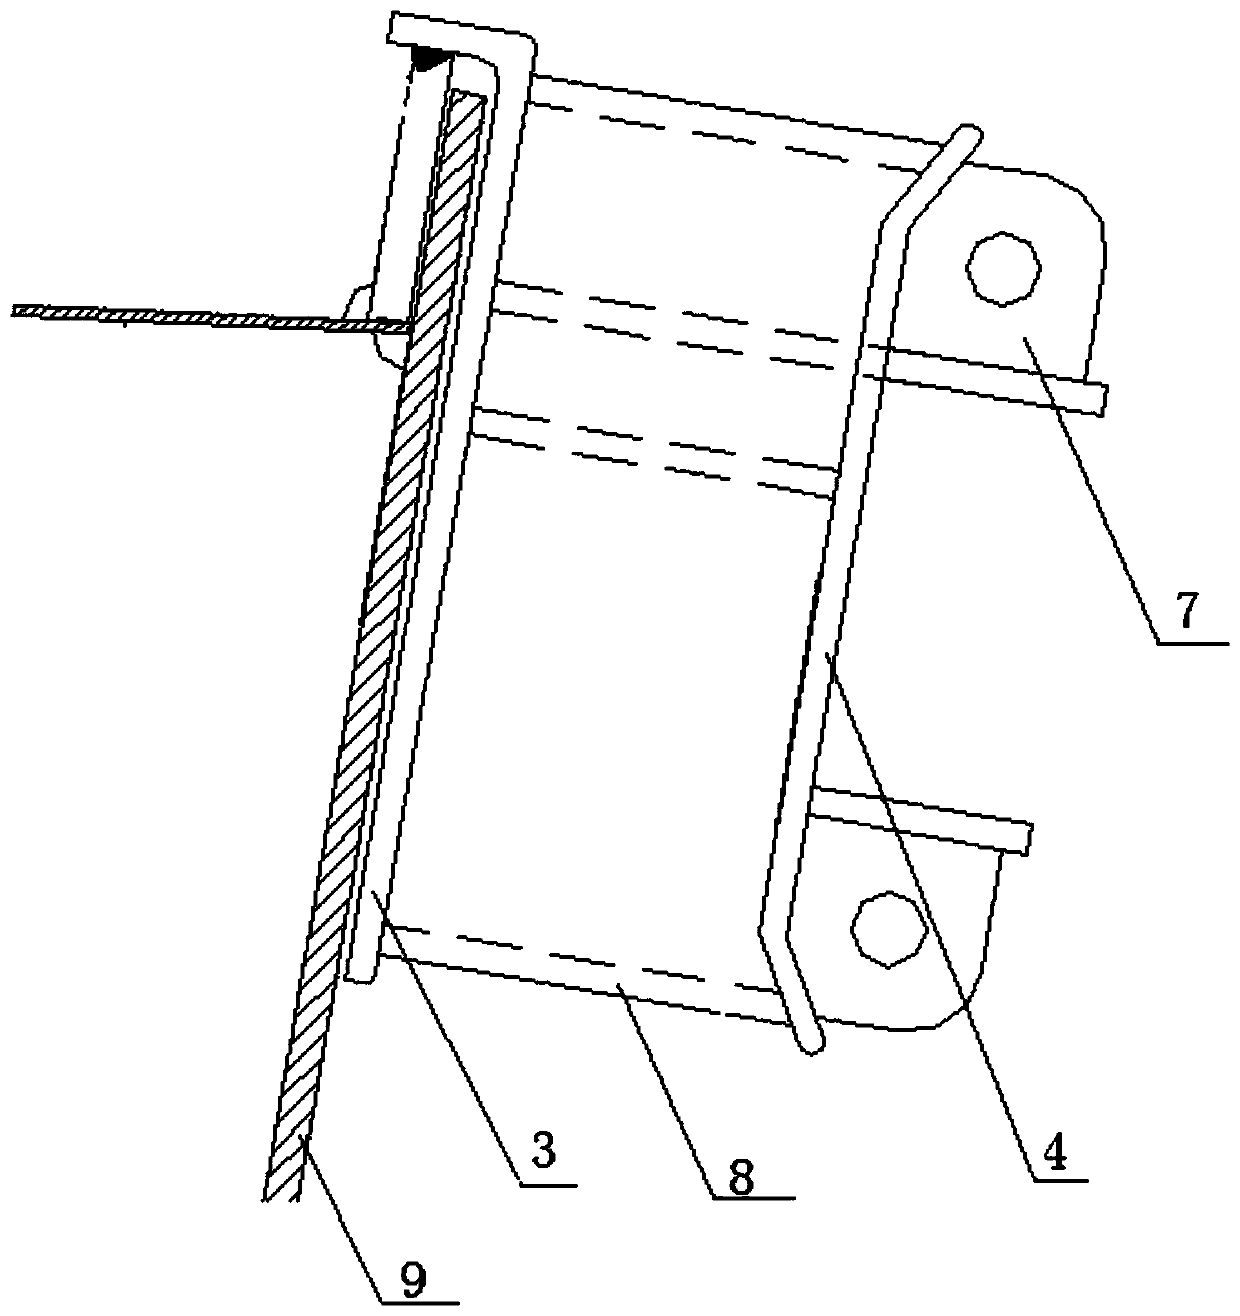 Method for hoisting full-width total section of thin-walled structure